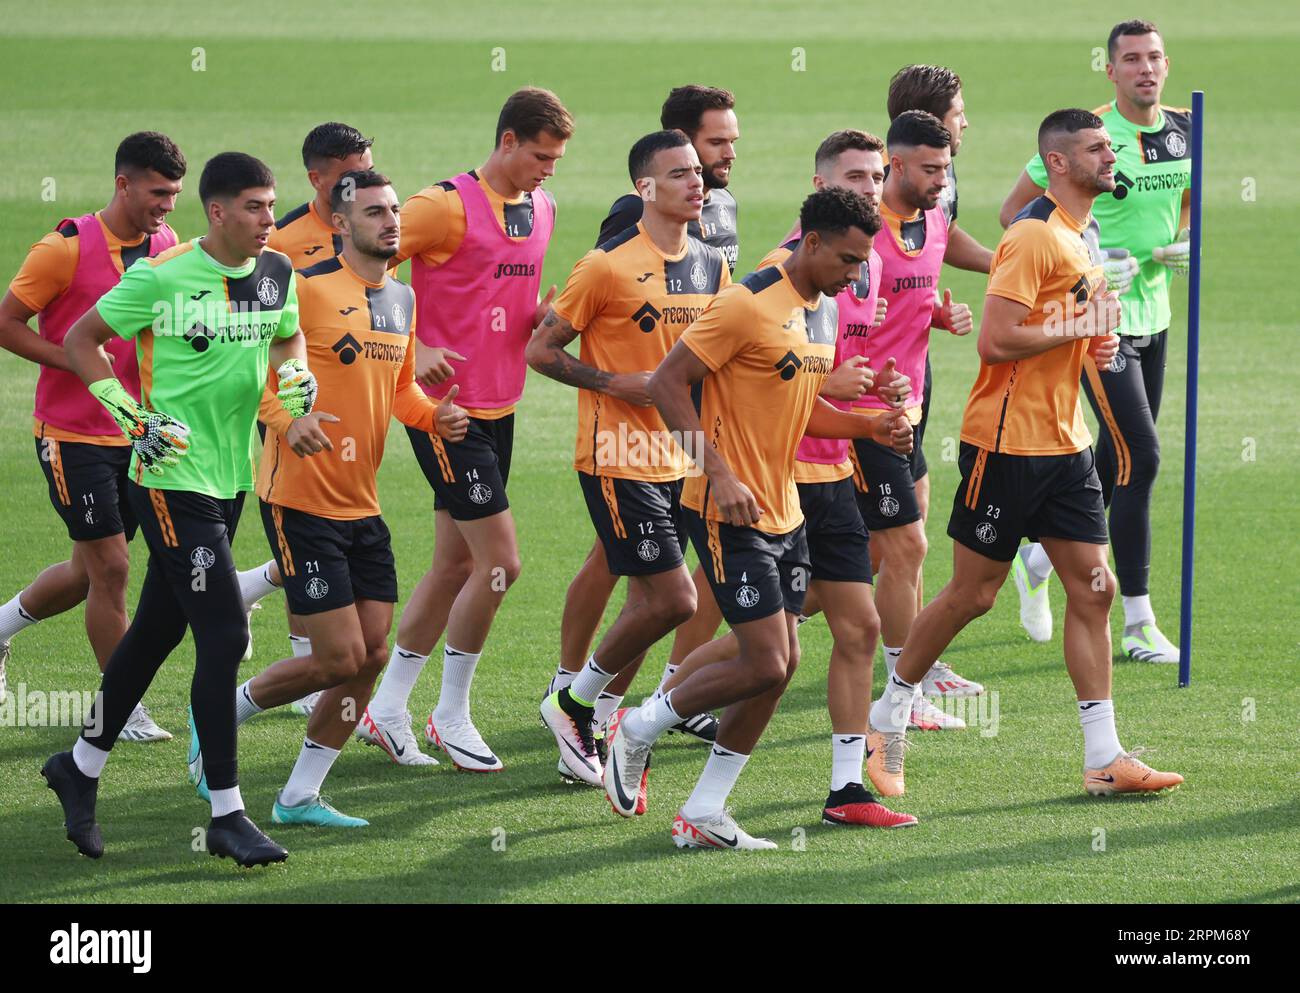 Getafe's Mason Greenwood (centre) during a training session at Estadio Coliseum Alfonso Perez, Getafe, Spain. The 21-year-old joined the LaLiga side on loan from Manchester United, who suspended him in January 2022 over allegations relating to a young woman after images and videos were posted online, on transfer deadline day. Picture date: Tuesday September 5, 2023. Stock Photo